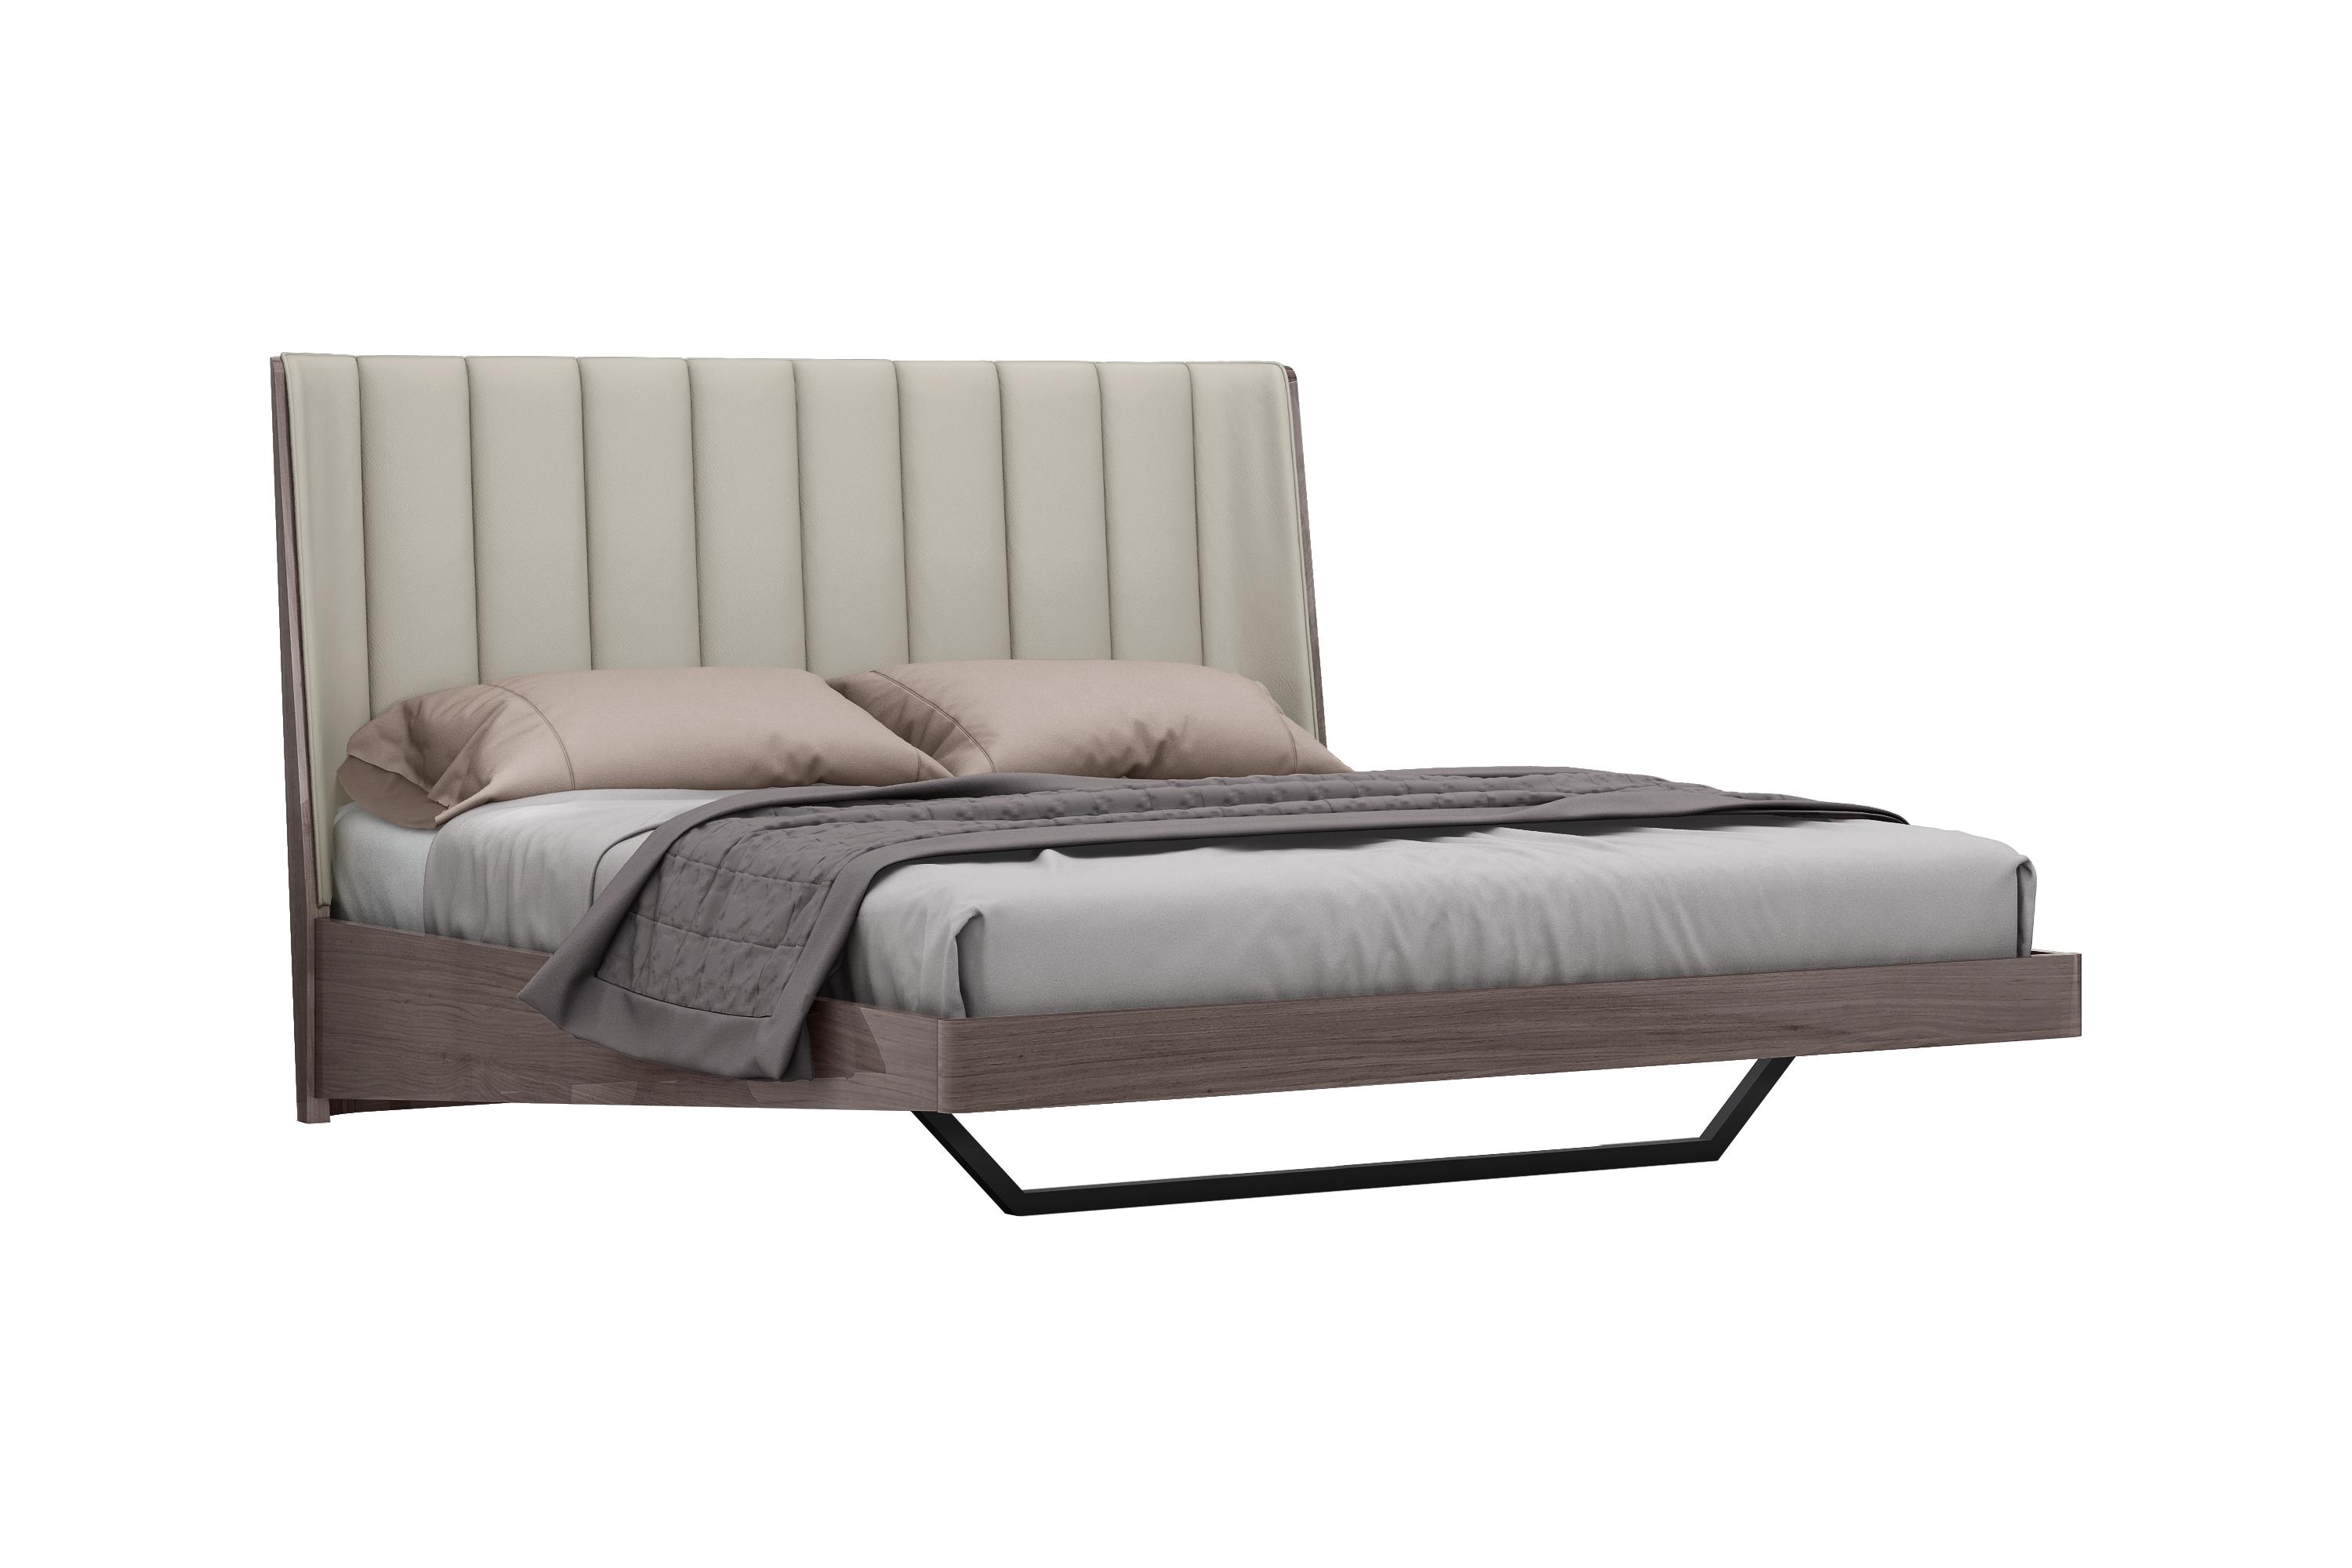 Contemporary Bed BQ1754-GRY/LGRY Berlin BQ1754-GRY/LGRY in Light Gray Faux Leather